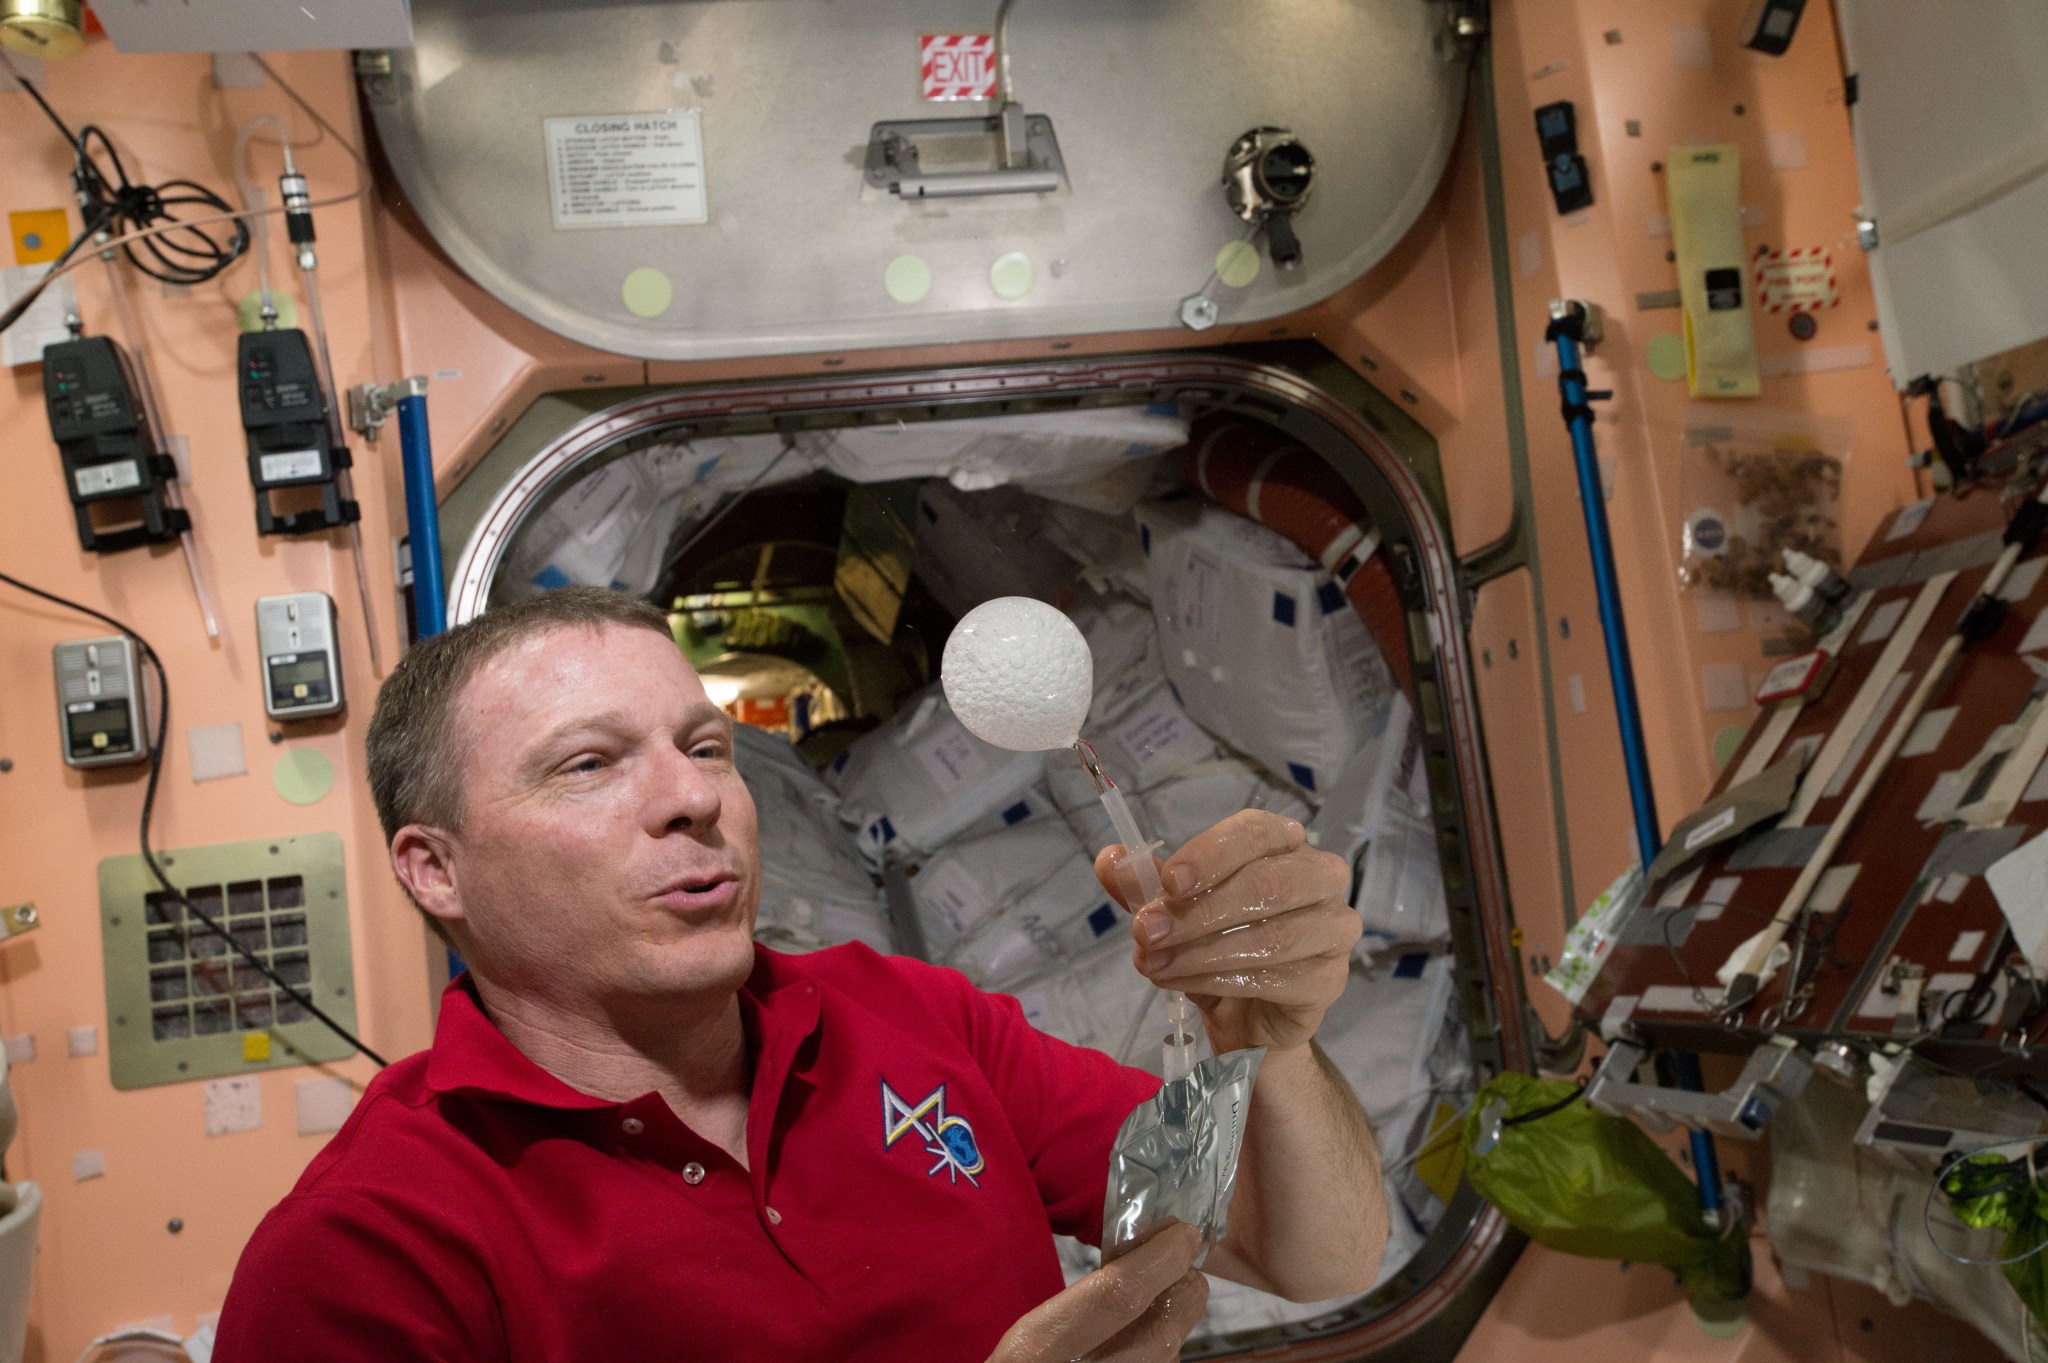 A water bubble with the remnants of an antacid tablet reaction floats in front of astronaut Terry Virts’ eye.